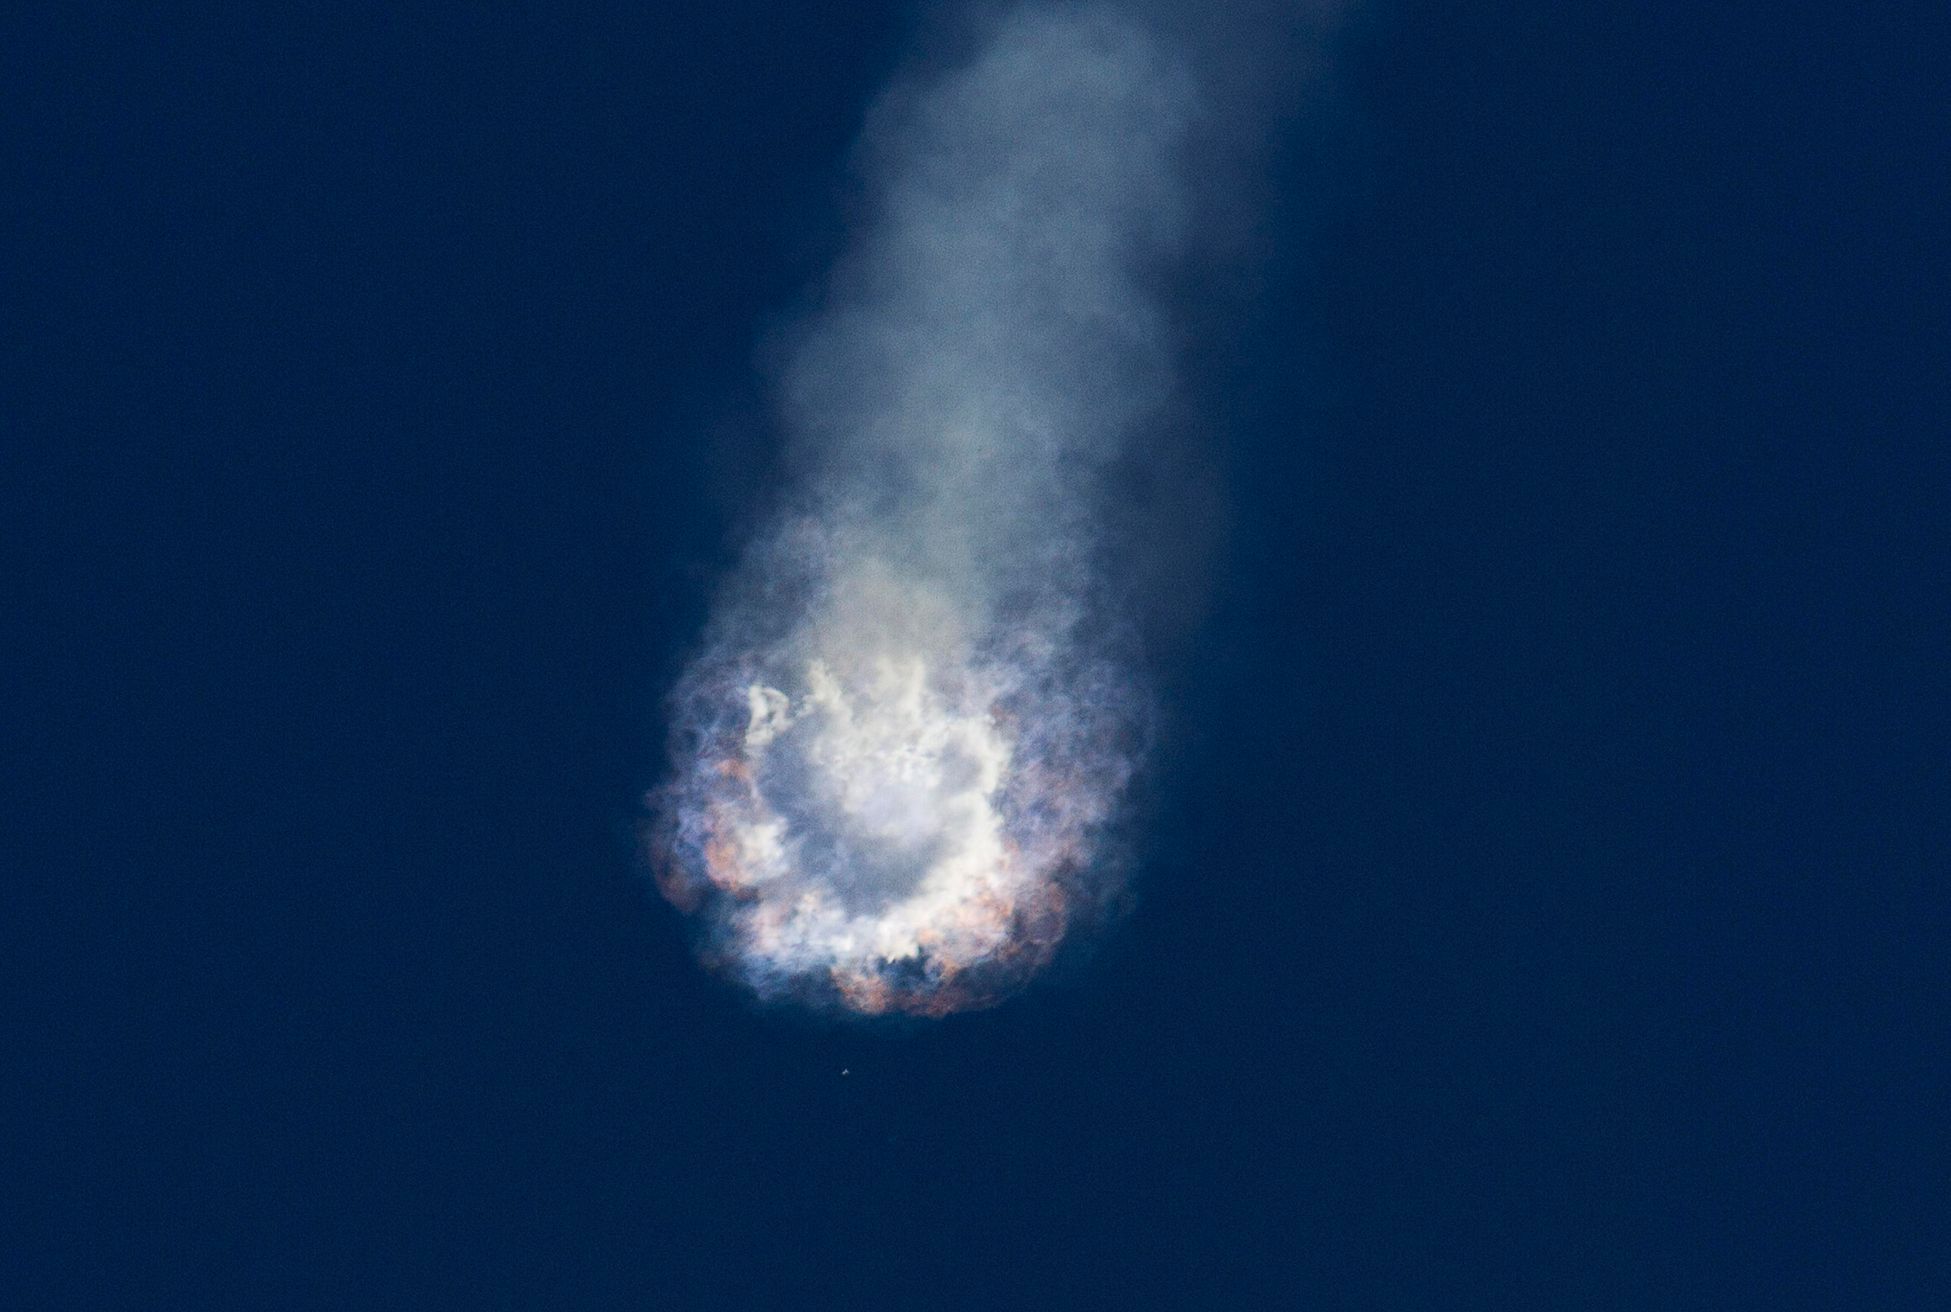 An unmanned SpaceX Falcon 9 rocket explodes after liftoff from Cape Canaveral